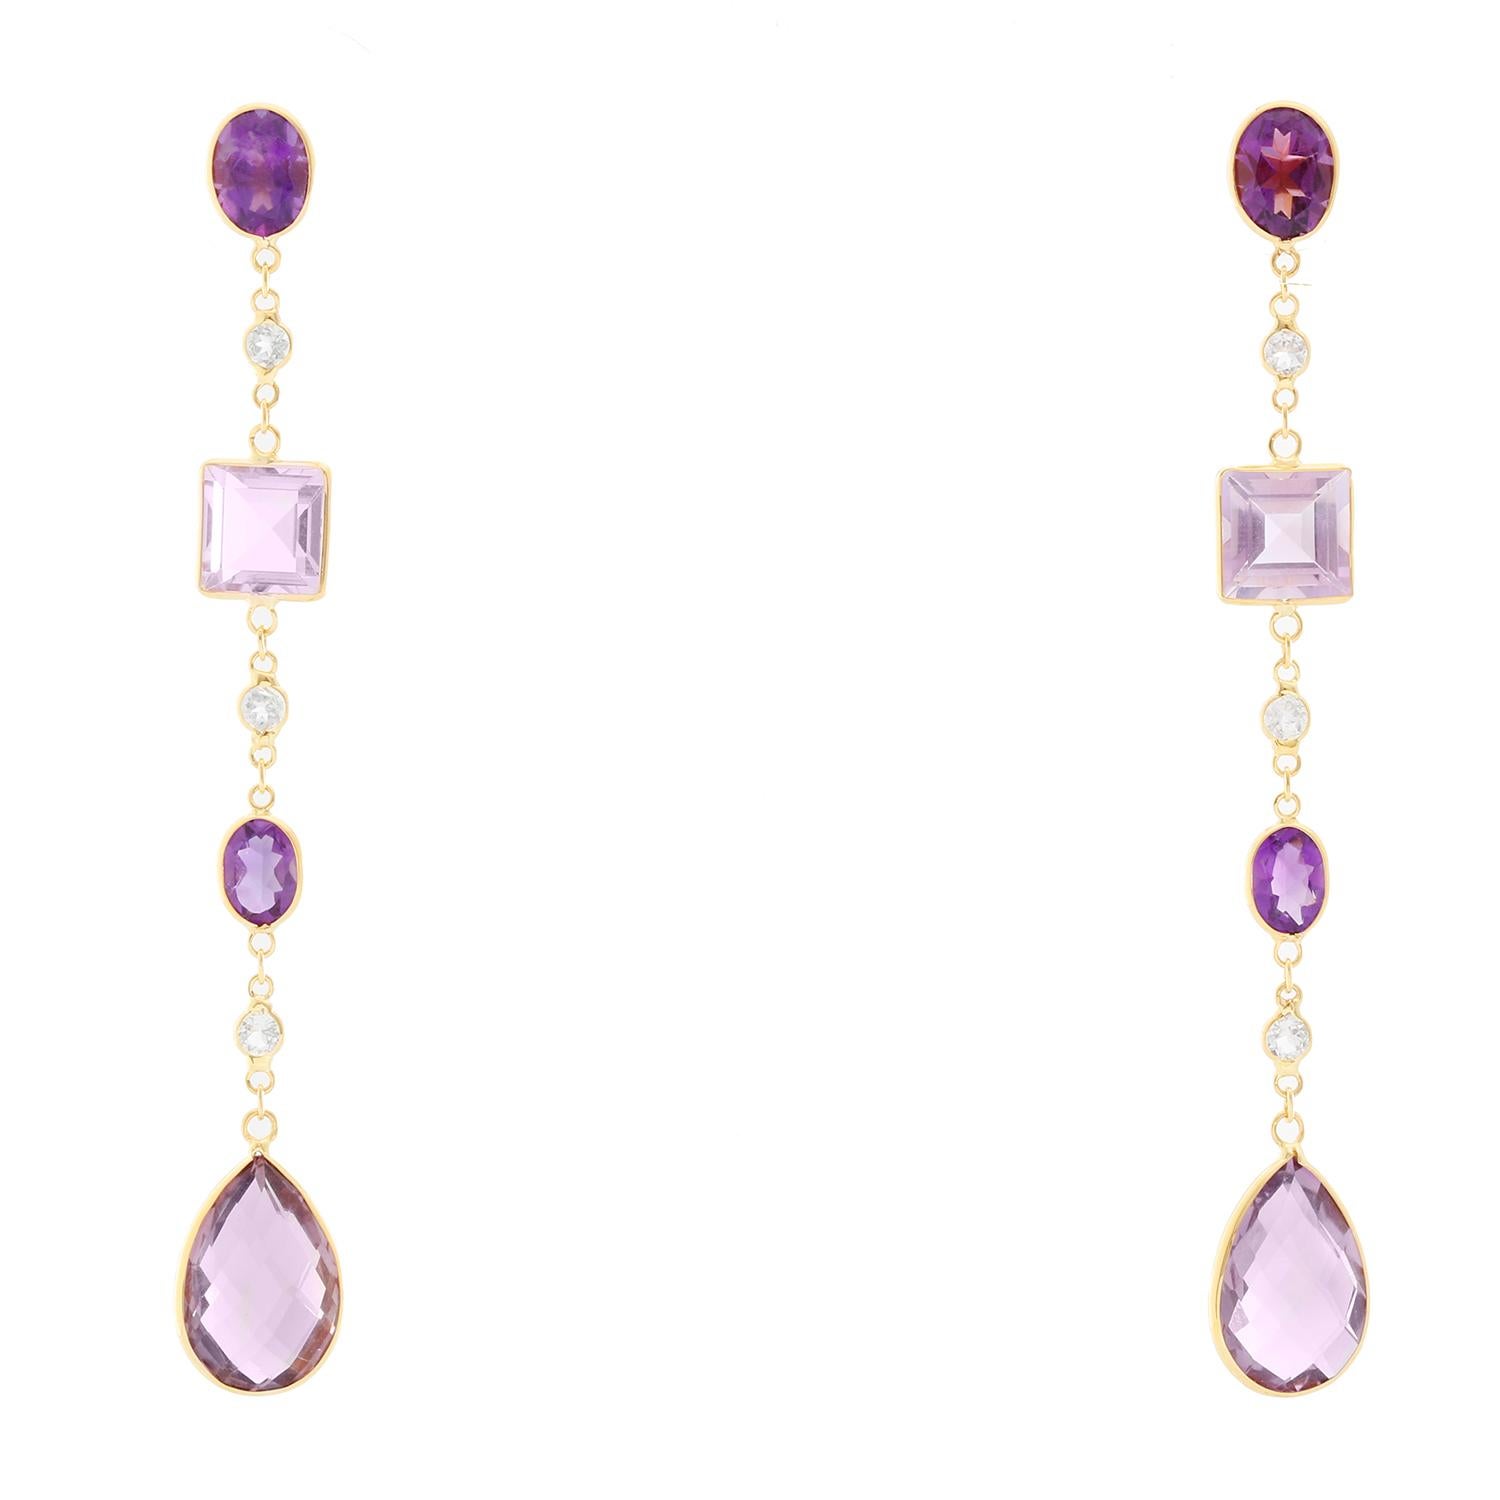 Yellow Gold Amethyst and White Topaz Dangle Earrings - New with DeMesy box. Total length 3 inches. Total weight 5.1.